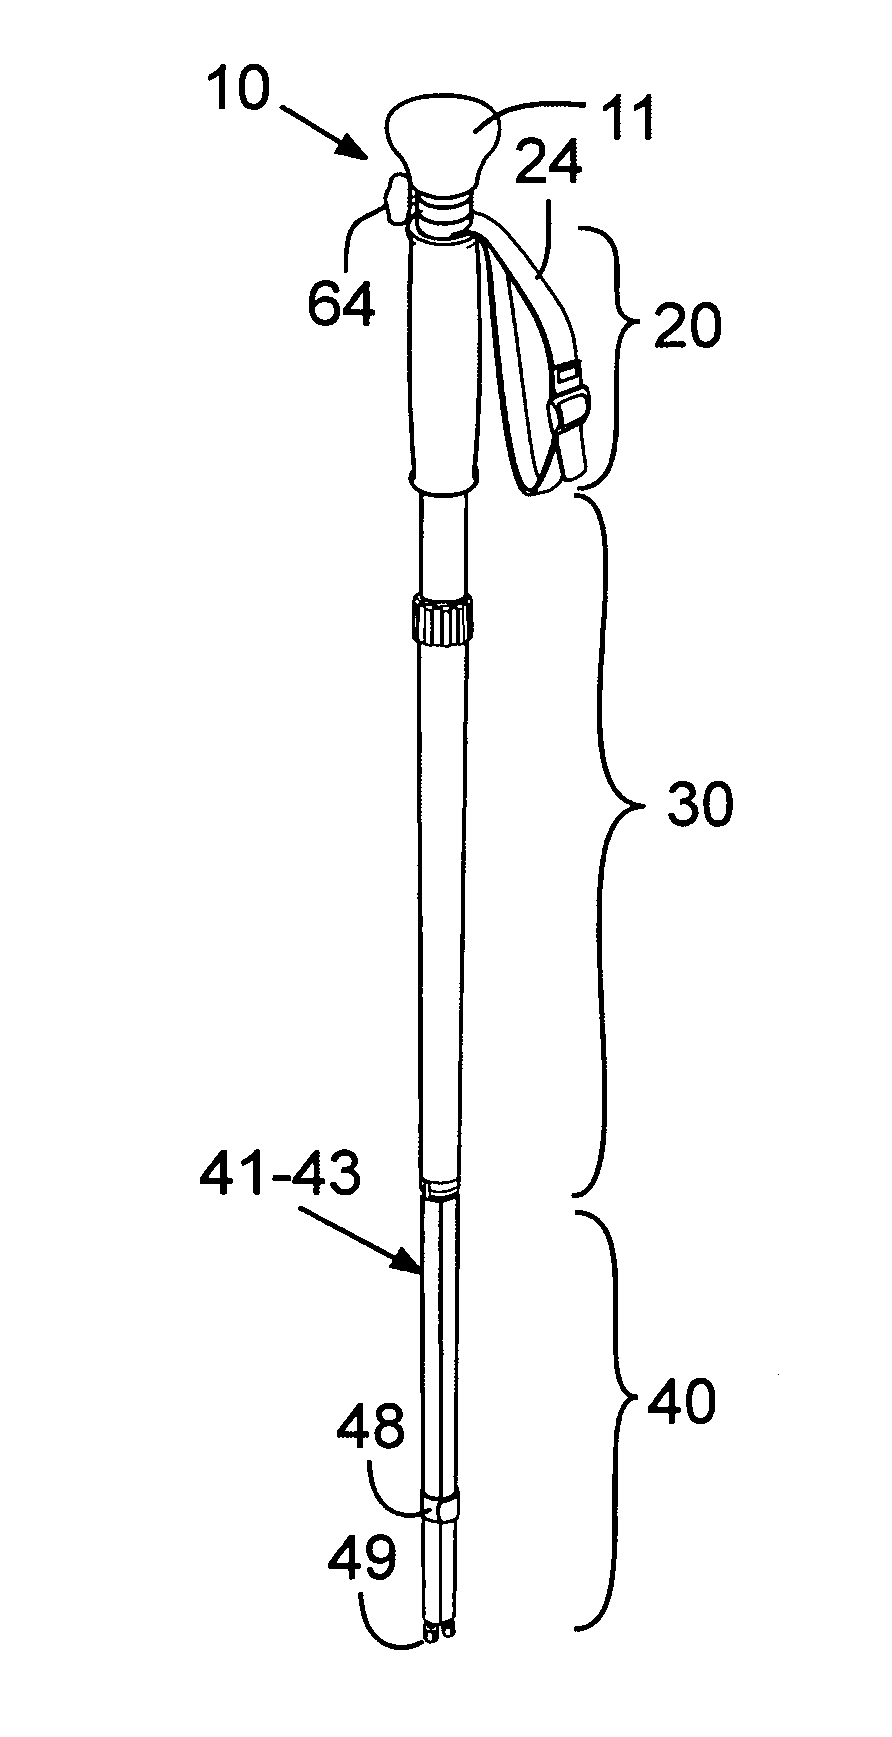 Walking staff with tripod base and adaptable mount